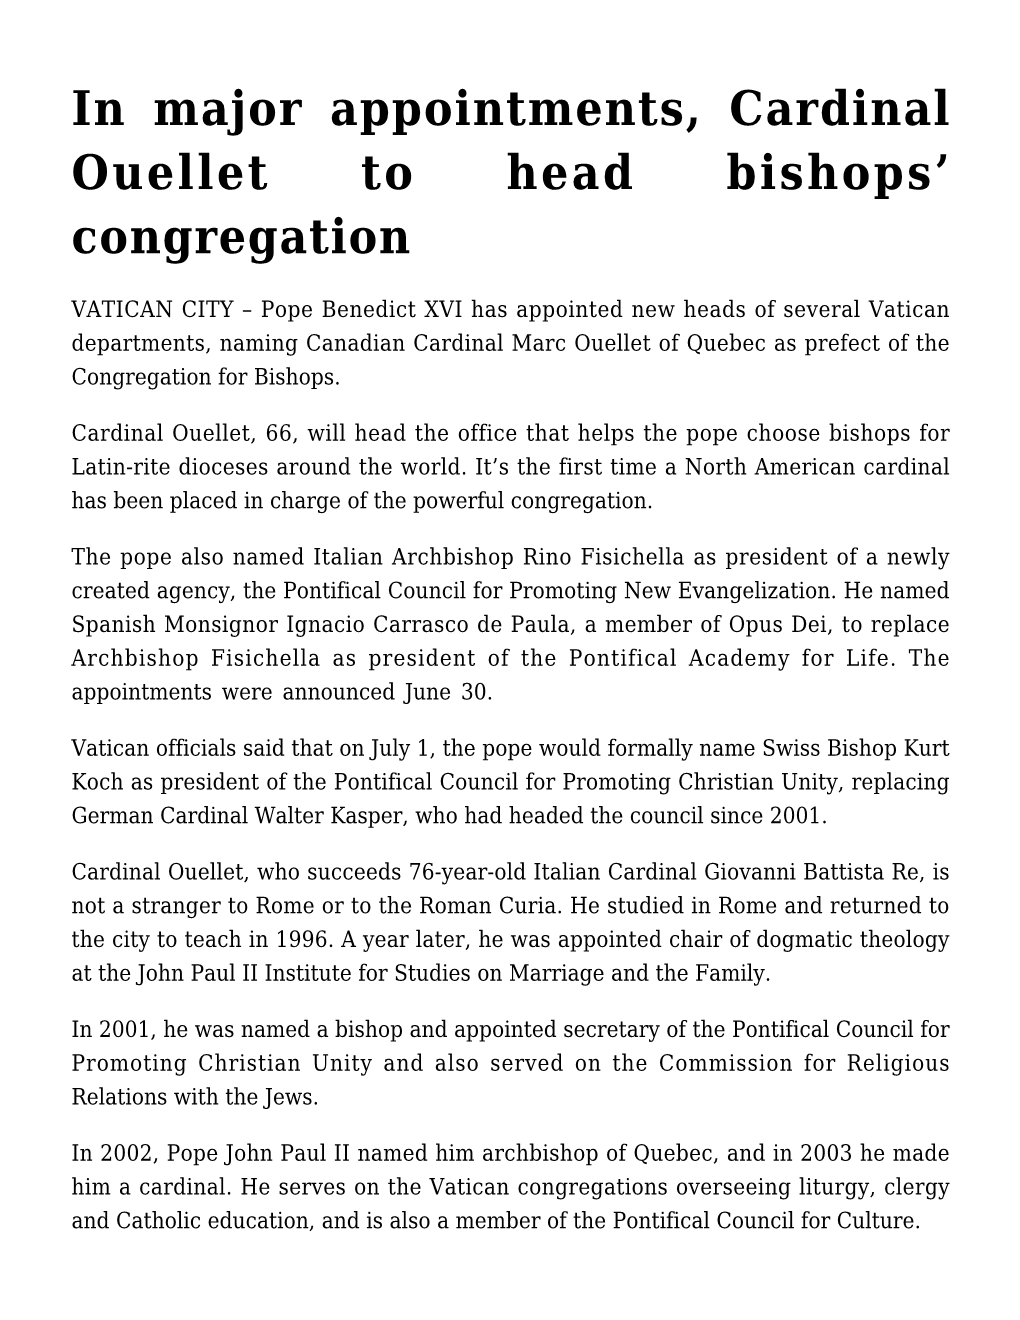 In Major Appointments, Cardinal Ouellet to Head Bishops' Congregation